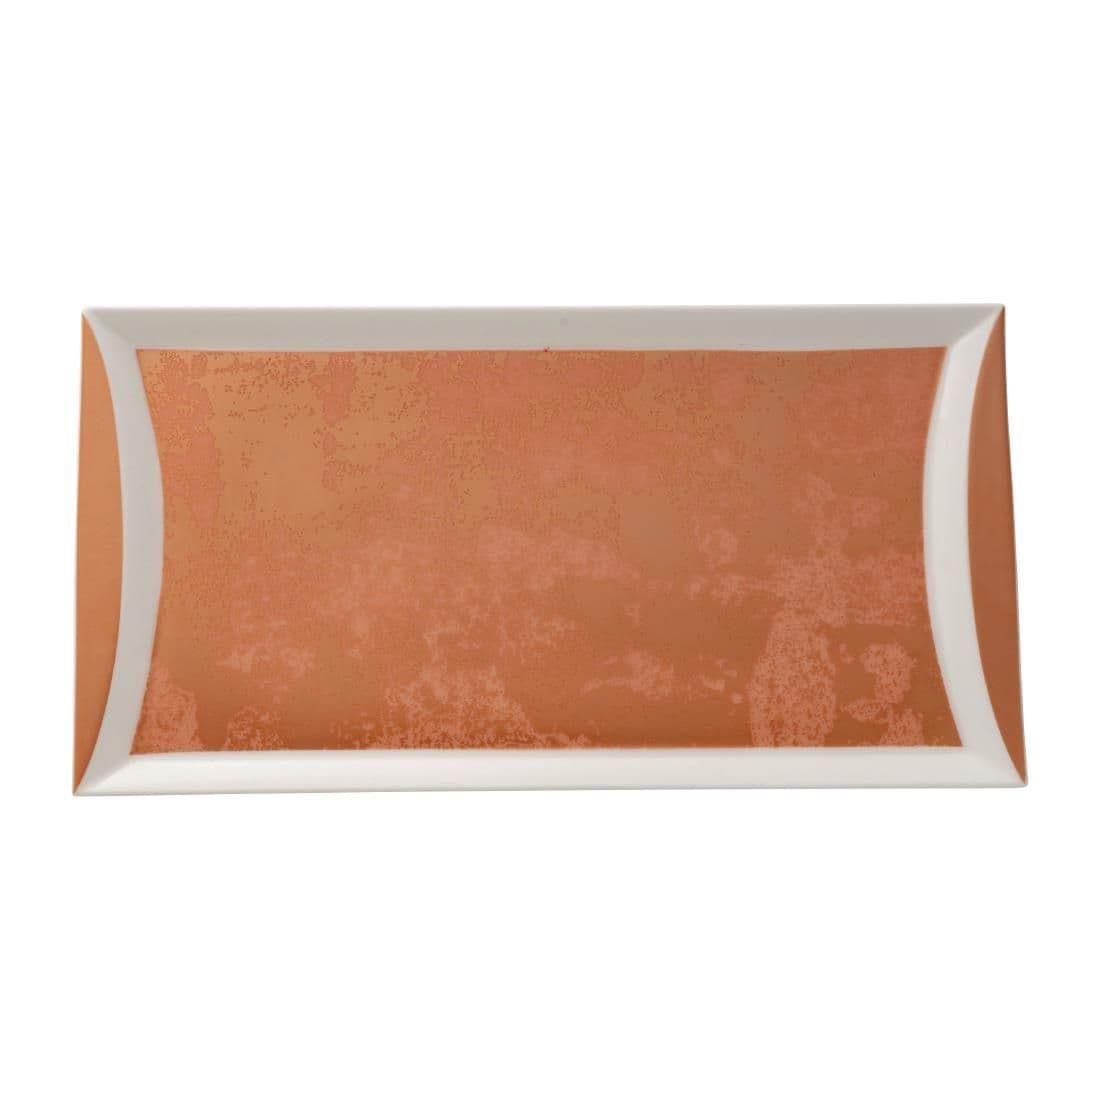 FE111 Royal Crown Derby Crushed Velvet Copper Rectangle Tray 320x160mm (Pack of 6) JD Catering Equipment Solutions Ltd